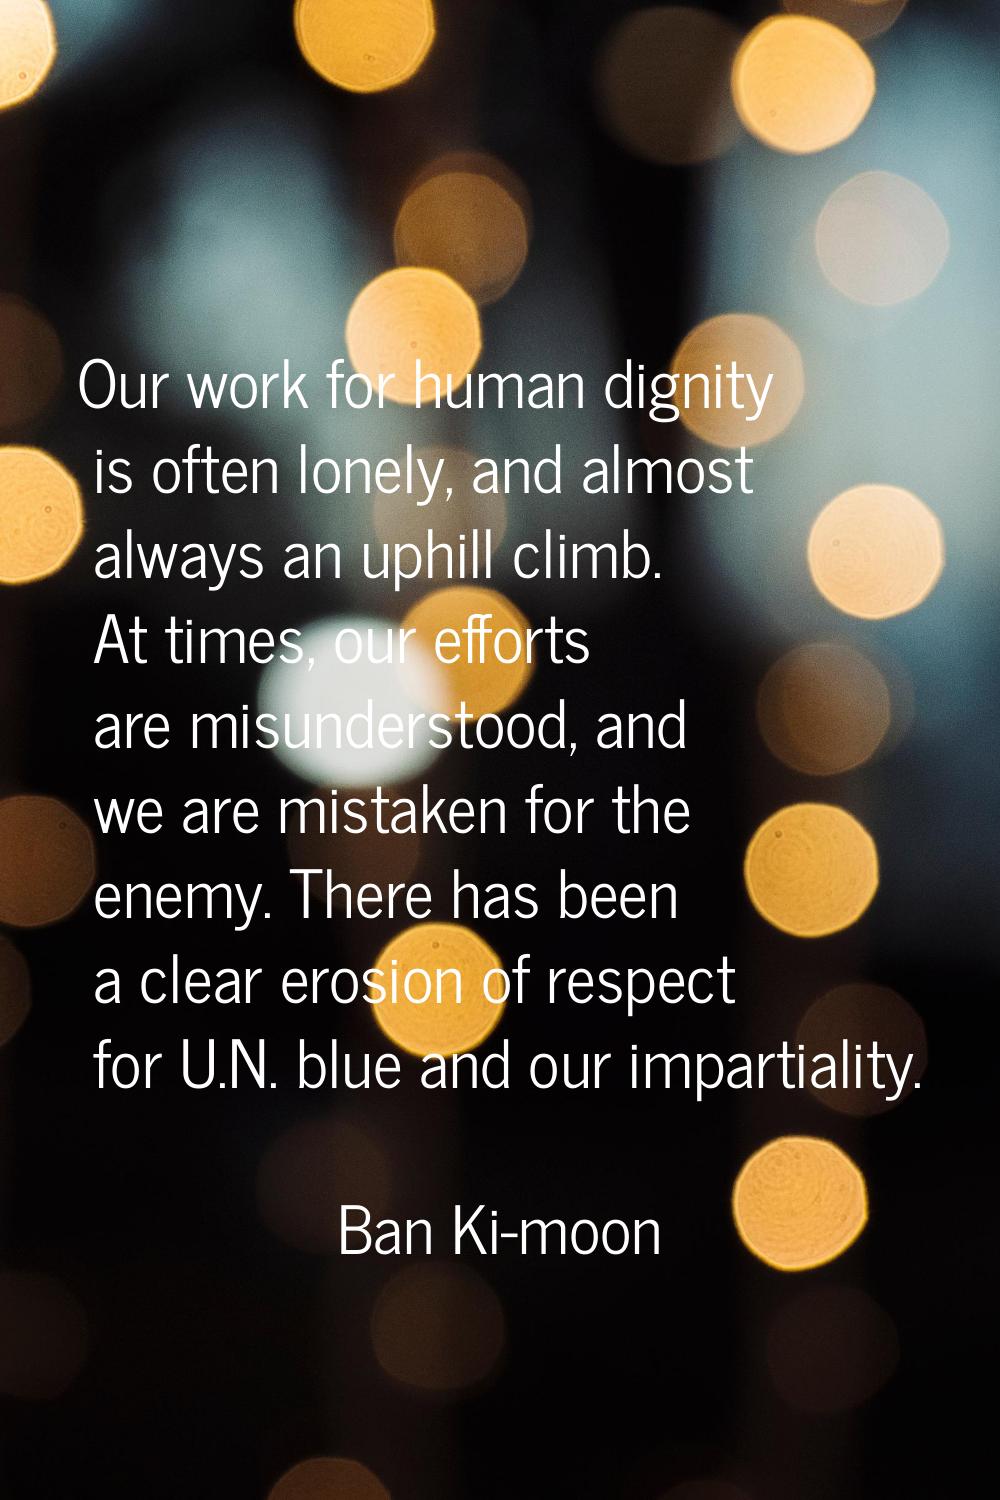 Our work for human dignity is often lonely, and almost always an uphill climb. At times, our effort